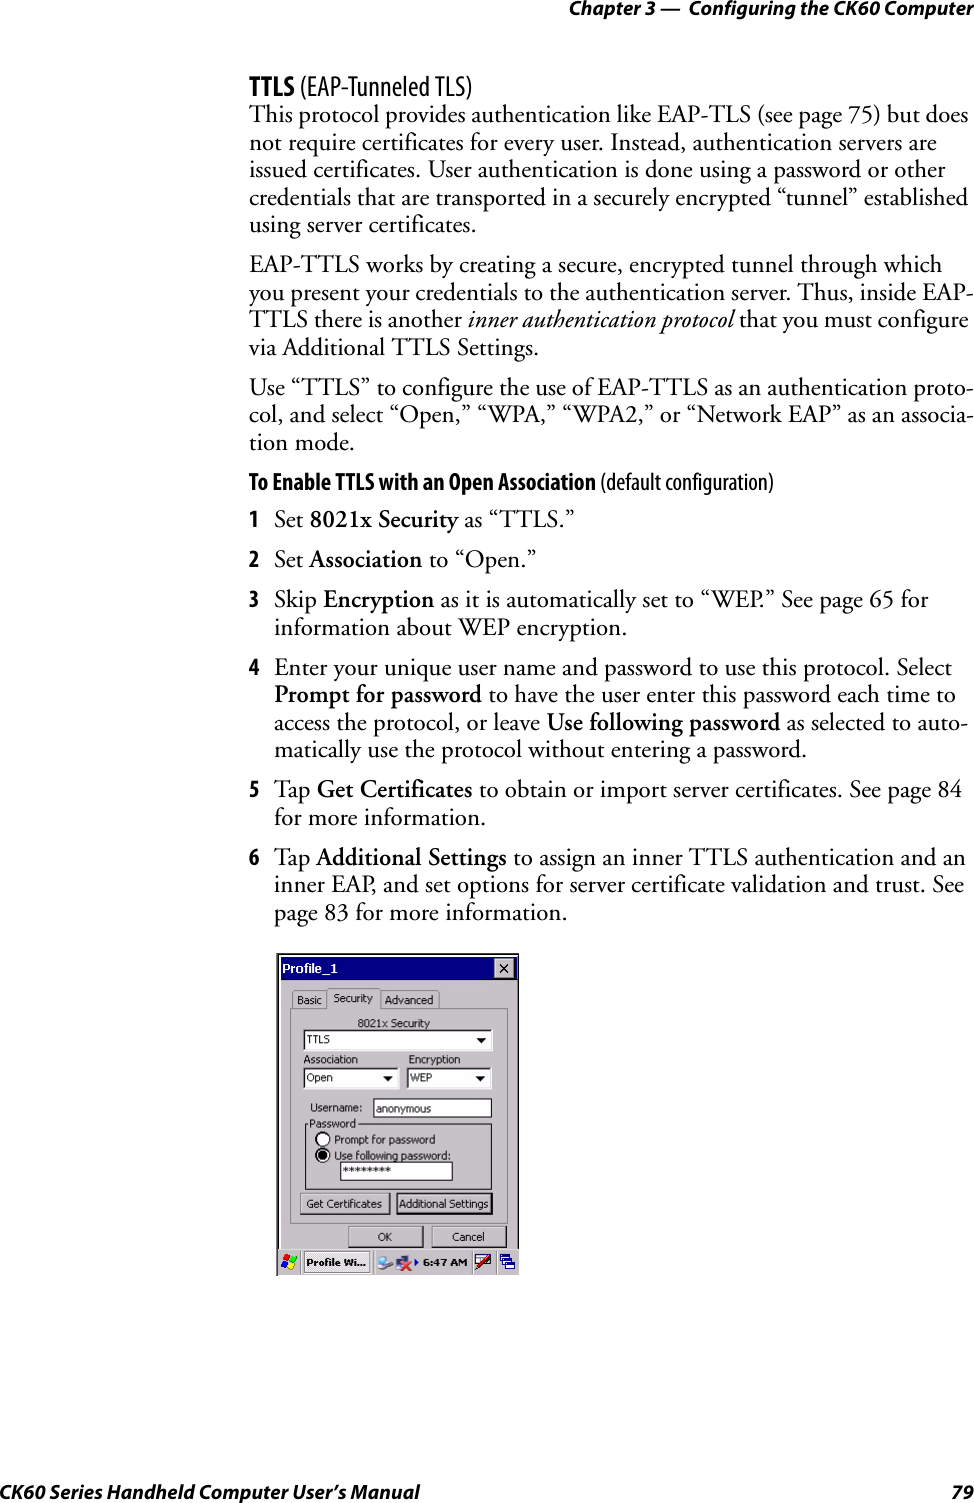 Chapter 3 —  Configuring the CK60 ComputerCK60 Series Handheld Computer User’s Manual 79TTLS (EAP-Tunneled TLS)This protocol provides authentication like EAP-TLS (see page 75) but does not require certificates for every user. Instead, authentication servers are issued certificates. User authentication is done using a password or other credentials that are transported in a securely encrypted “tunnel” established using server certificates.EAP-TTLS works by creating a secure, encrypted tunnel through which you present your credentials to the authentication server. Thus, inside EAP-TTLS there is another inner authentication protocol that you must configure via Additional TTLS Settings.Use “TTLS” to configure the use of EAP-TTLS as an authentication proto-col, and select “Open,” “WPA,” “WPA2,” or “Network EAP” as an associa-tion mode.To Enable TTLS with an Open Association (default configuration)1Set 8021x Security as “TTLS.”2Set Association to “Open.”3Skip Encryption as it is automatically set to “WEP.” See page 65 for information about WEP encryption.4Enter your unique user name and password to use this protocol. Select Prompt for password to have the user enter this password each time to access the protocol, or leave Use following password as selected to auto-matically use the protocol without entering a password.5Tap Get Certificates to obtain or import server certificates. See page 84 for more information.6Tap Additional Settings to assign an inner TTLS authentication and an inner EAP, and set options for server certificate validation and trust. See page 83 for more information.